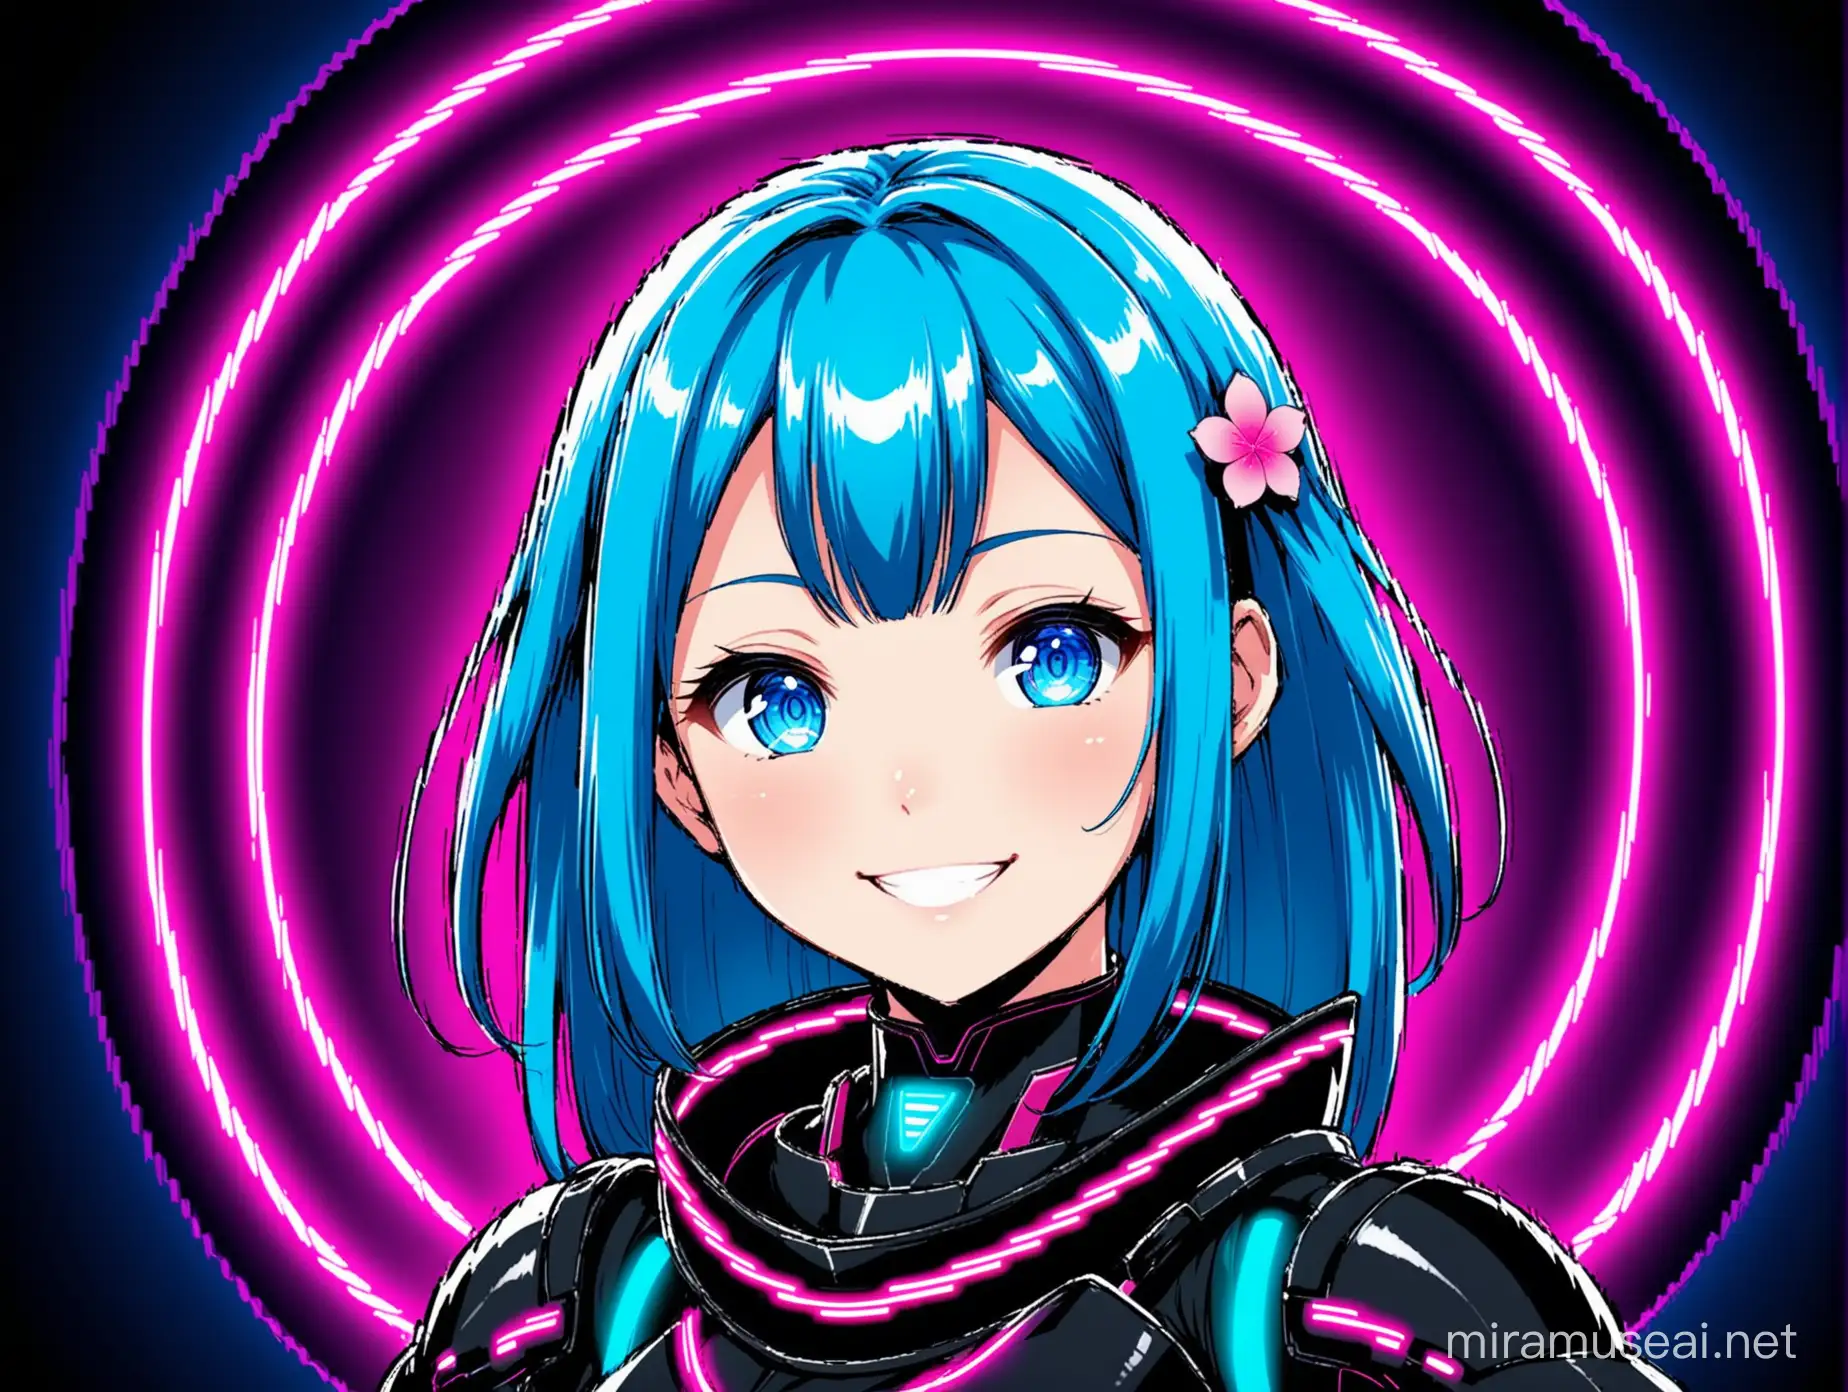 Futuristic Anime Girl with Blue Hair in Black Armor and Pink Flower Cyberpunk Character Art